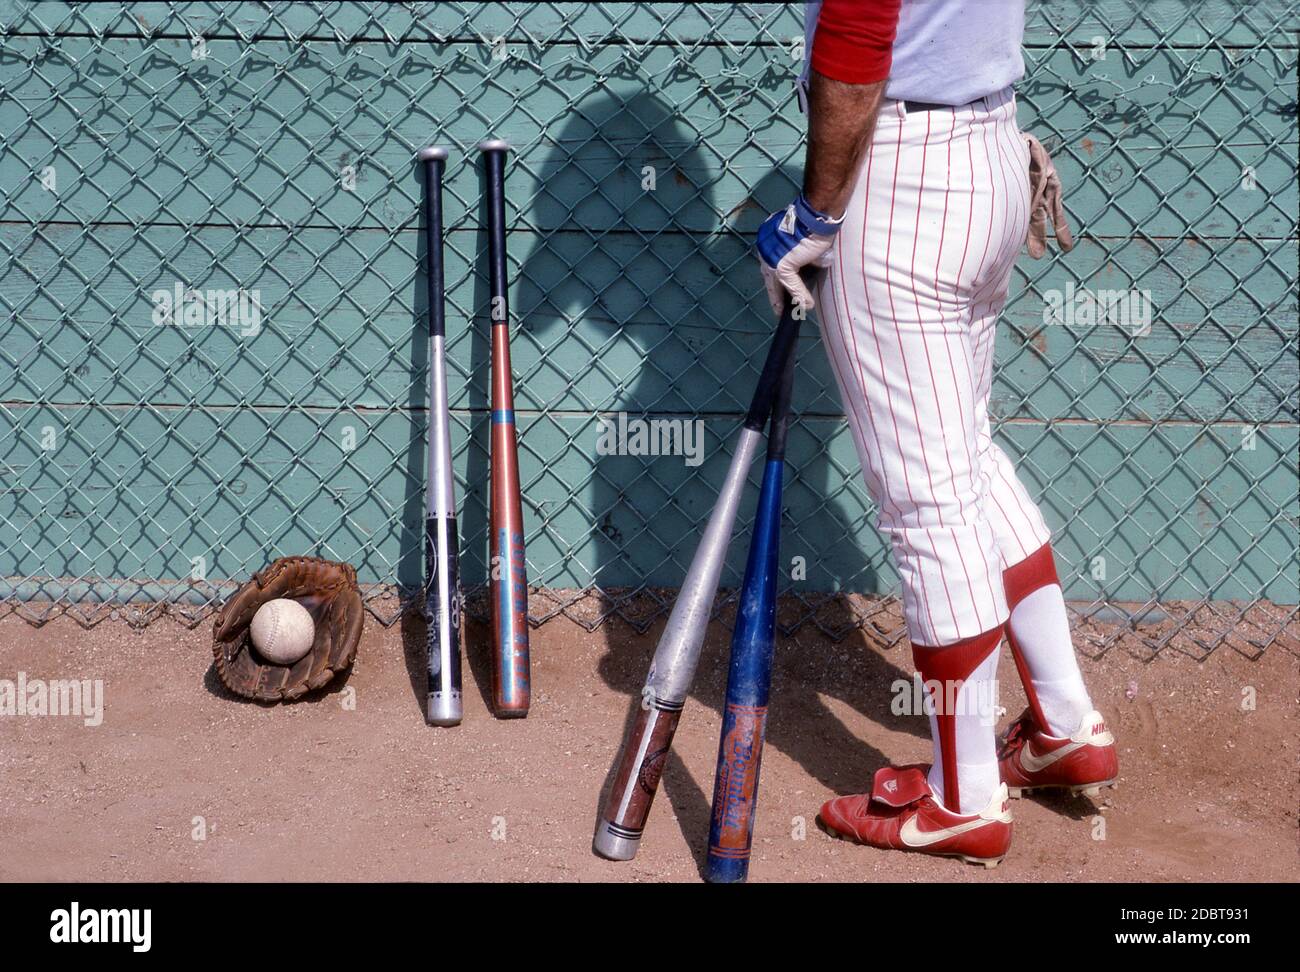 Softball player with sporting equipment for batting and fielding Stock Photo